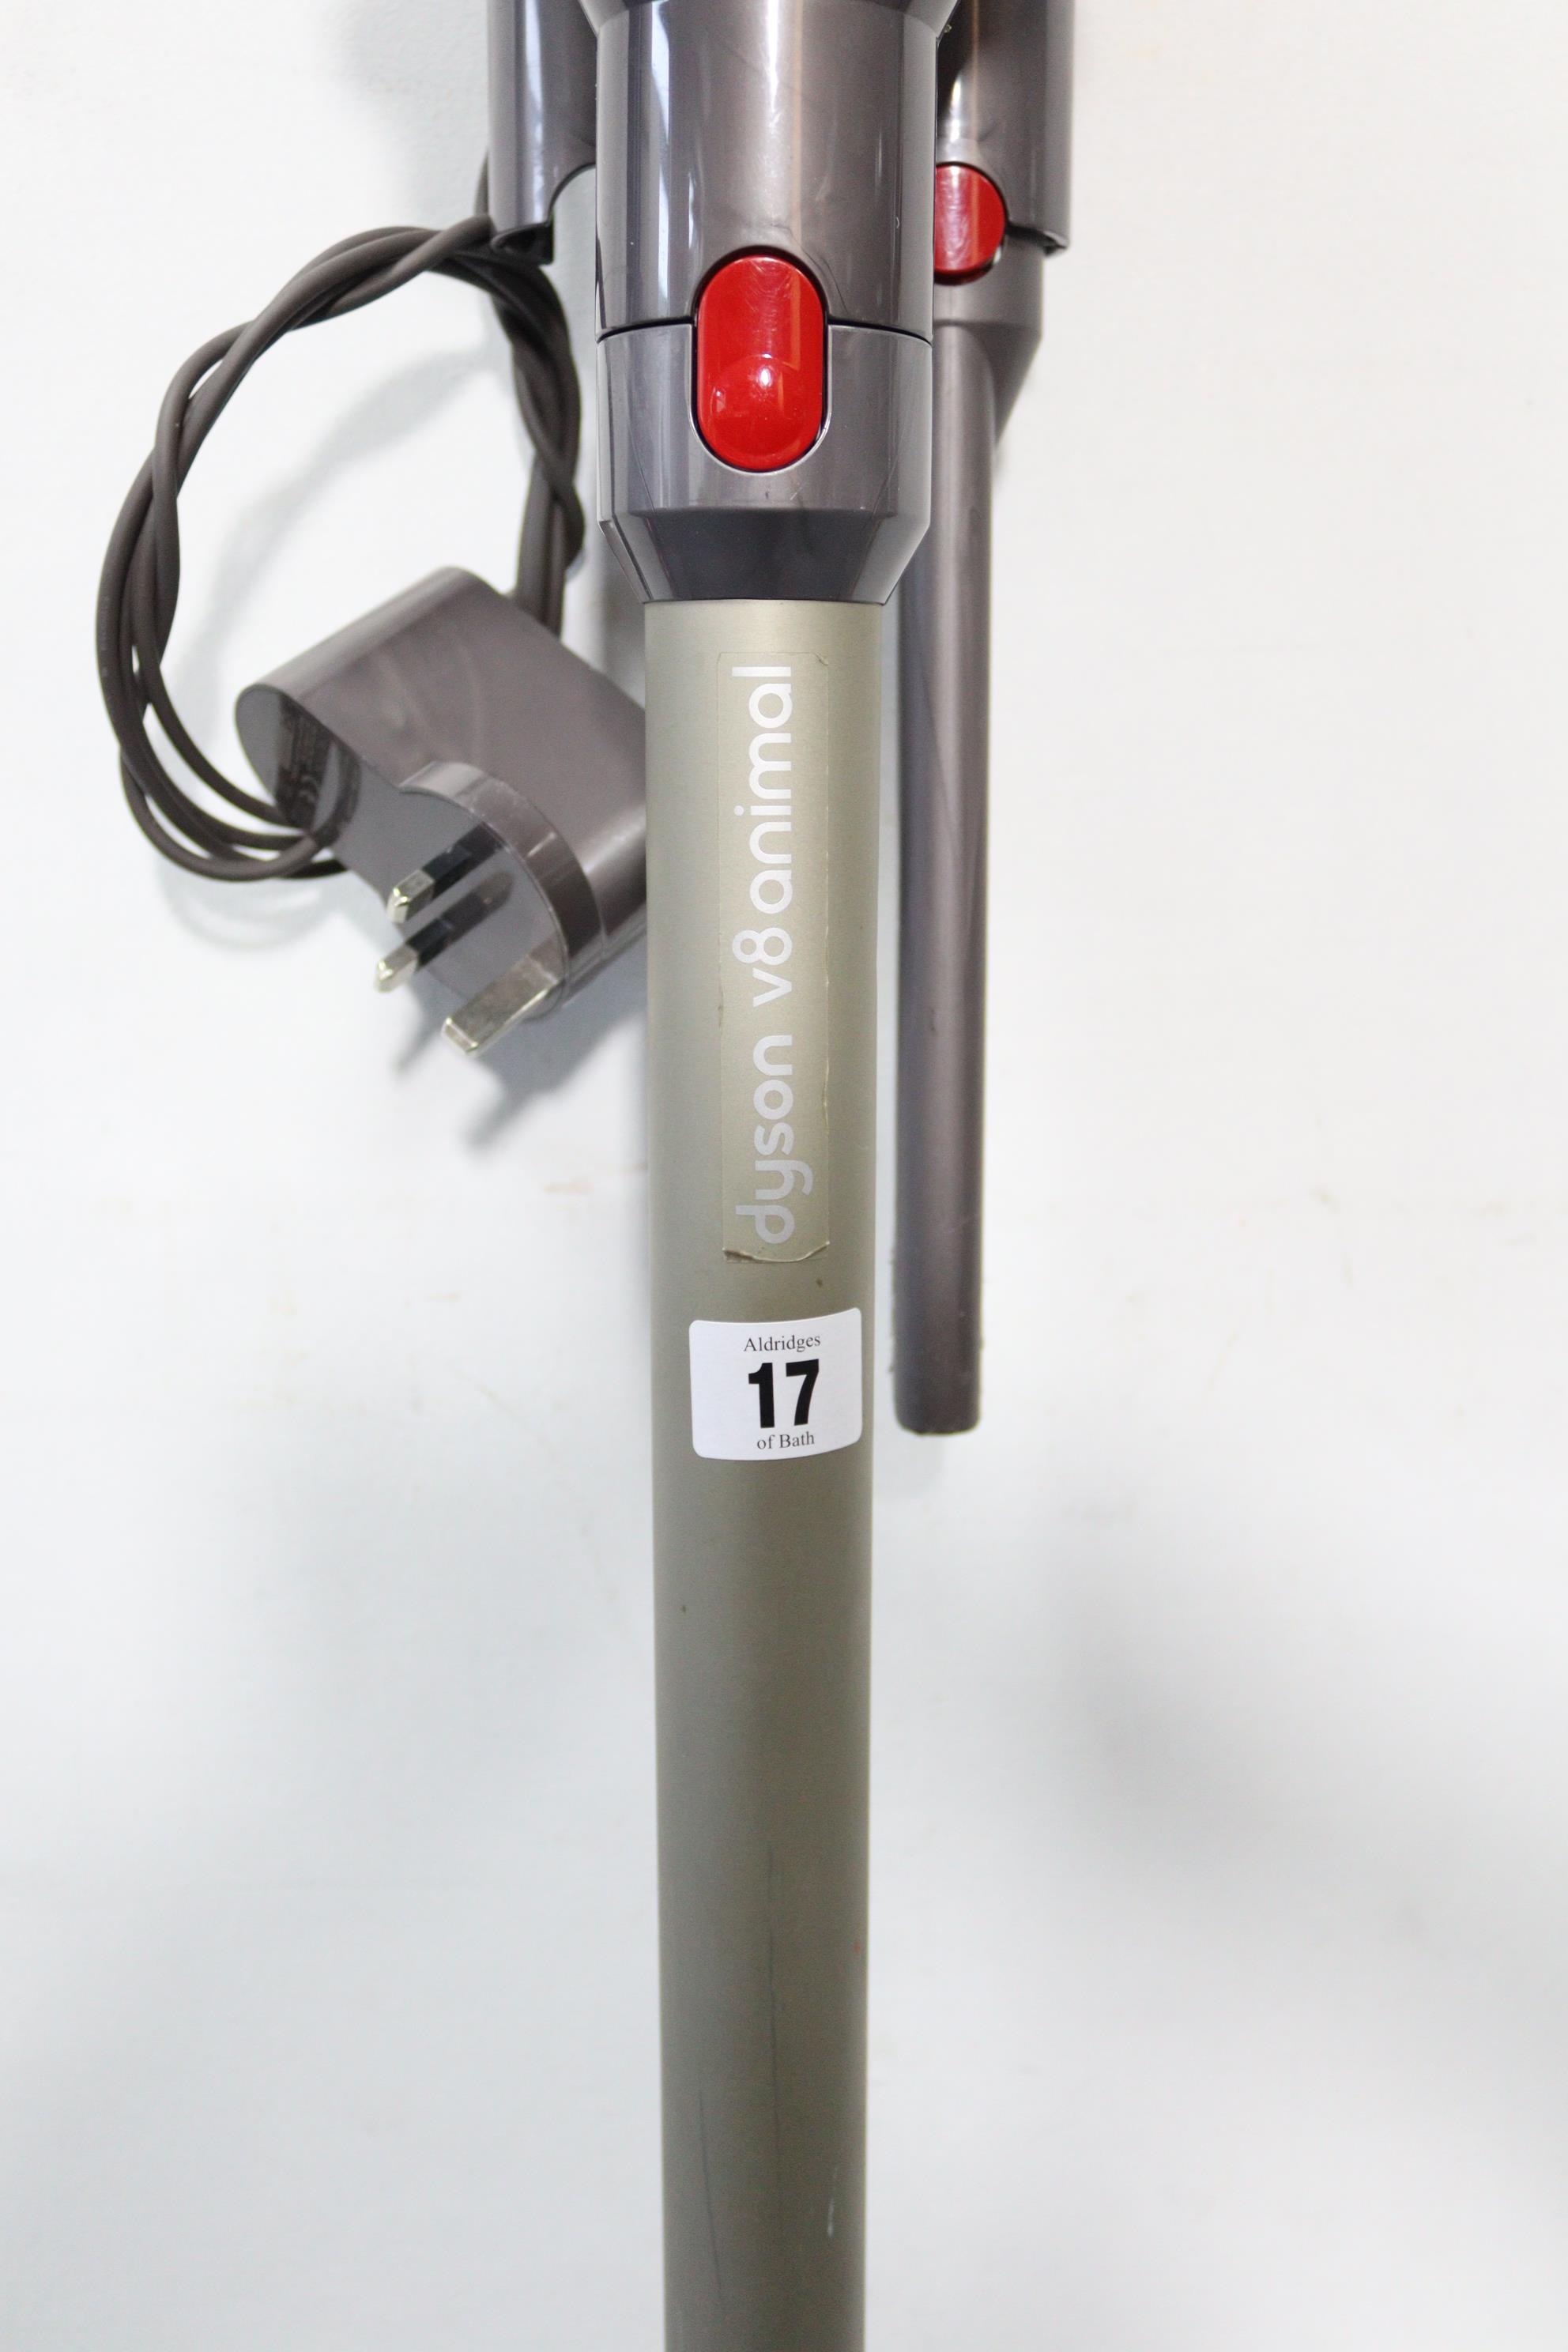 A Dyson “V8 Animal” cordless vacuum cleaner, with charger, w.o. - Image 4 of 4